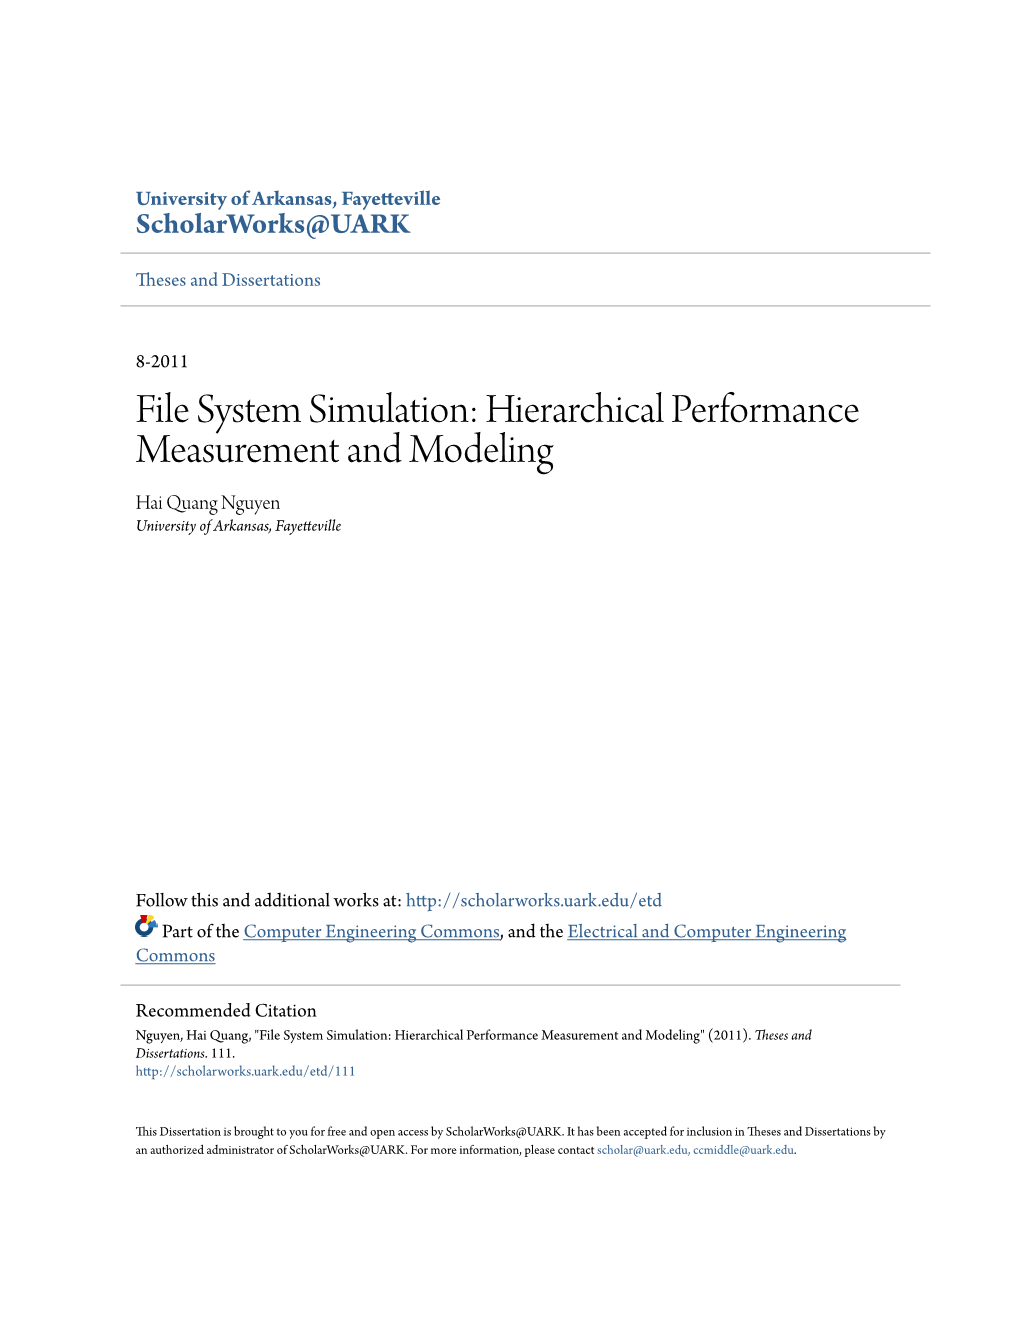 File System Simulation: Hierarchical Performance Measurement and Modeling Hai Quang Nguyen University of Arkansas, Fayetteville